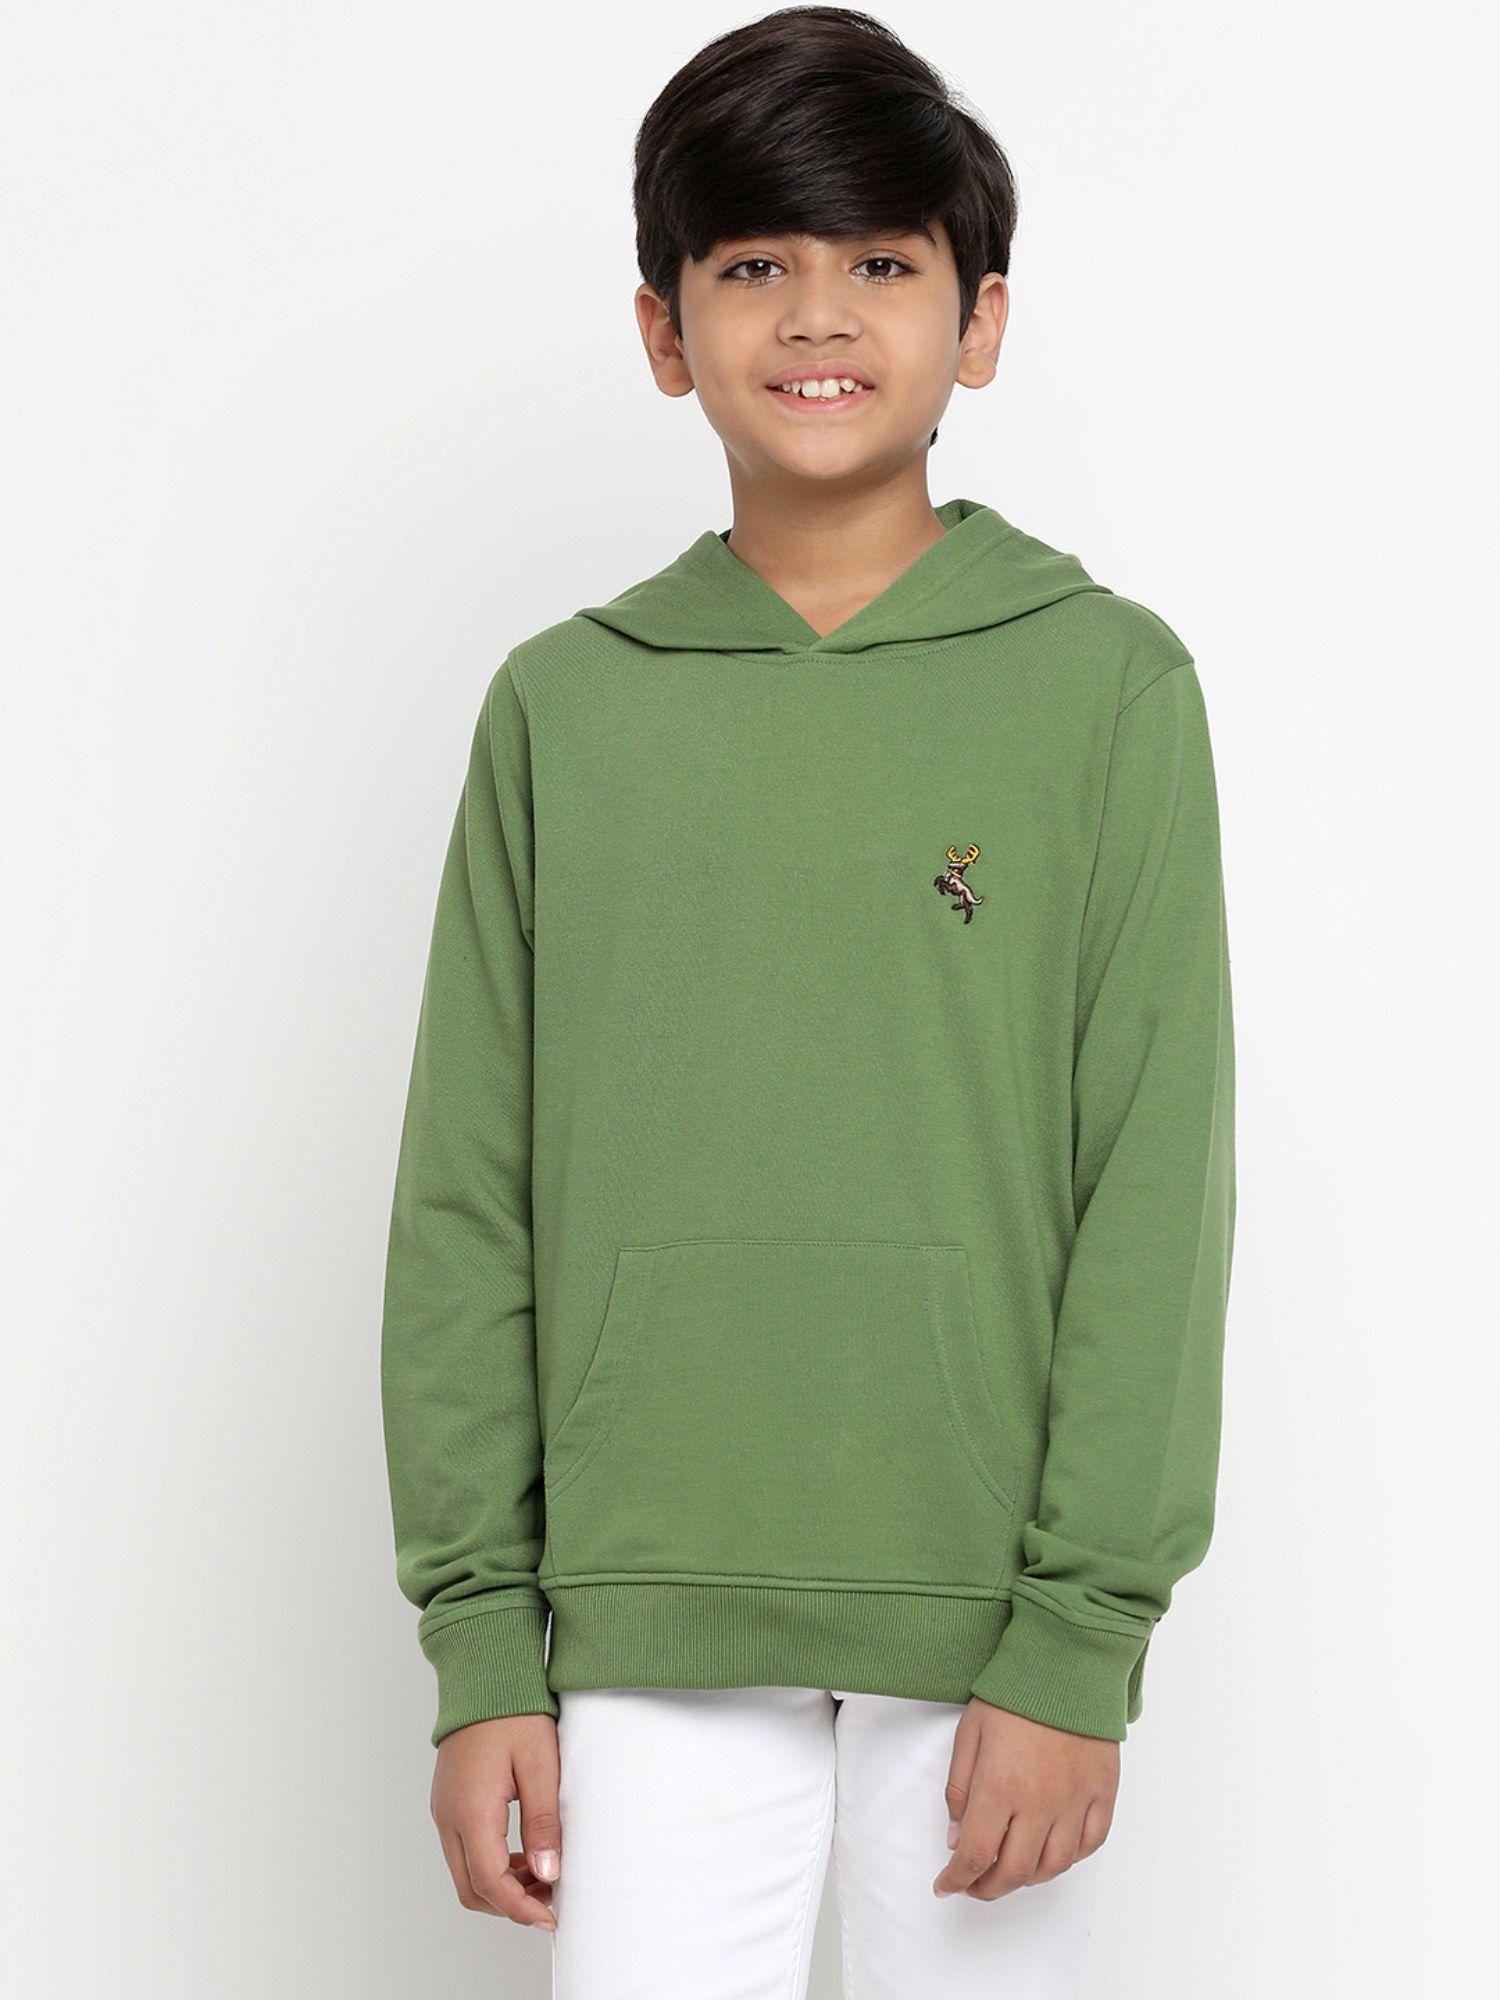 boys solid light weight cotton looper olive hoodie